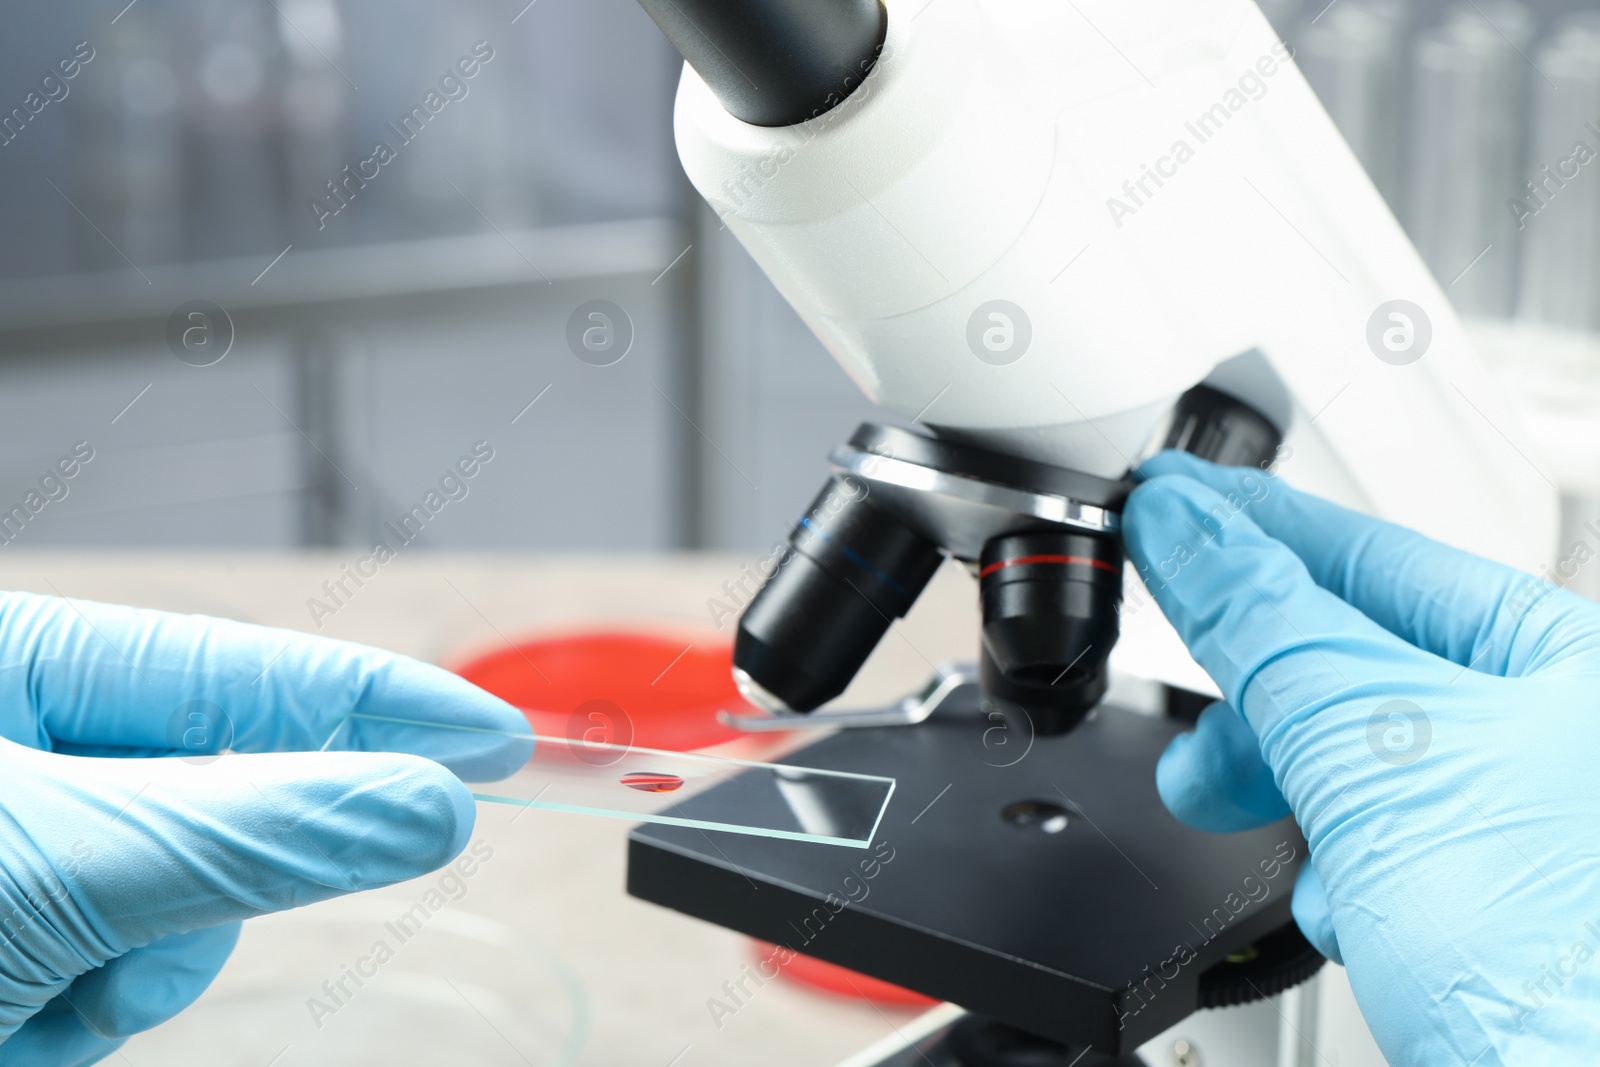 Photo of Scientist examining sample of red liquid on slide under microscope in laboratory, closeup